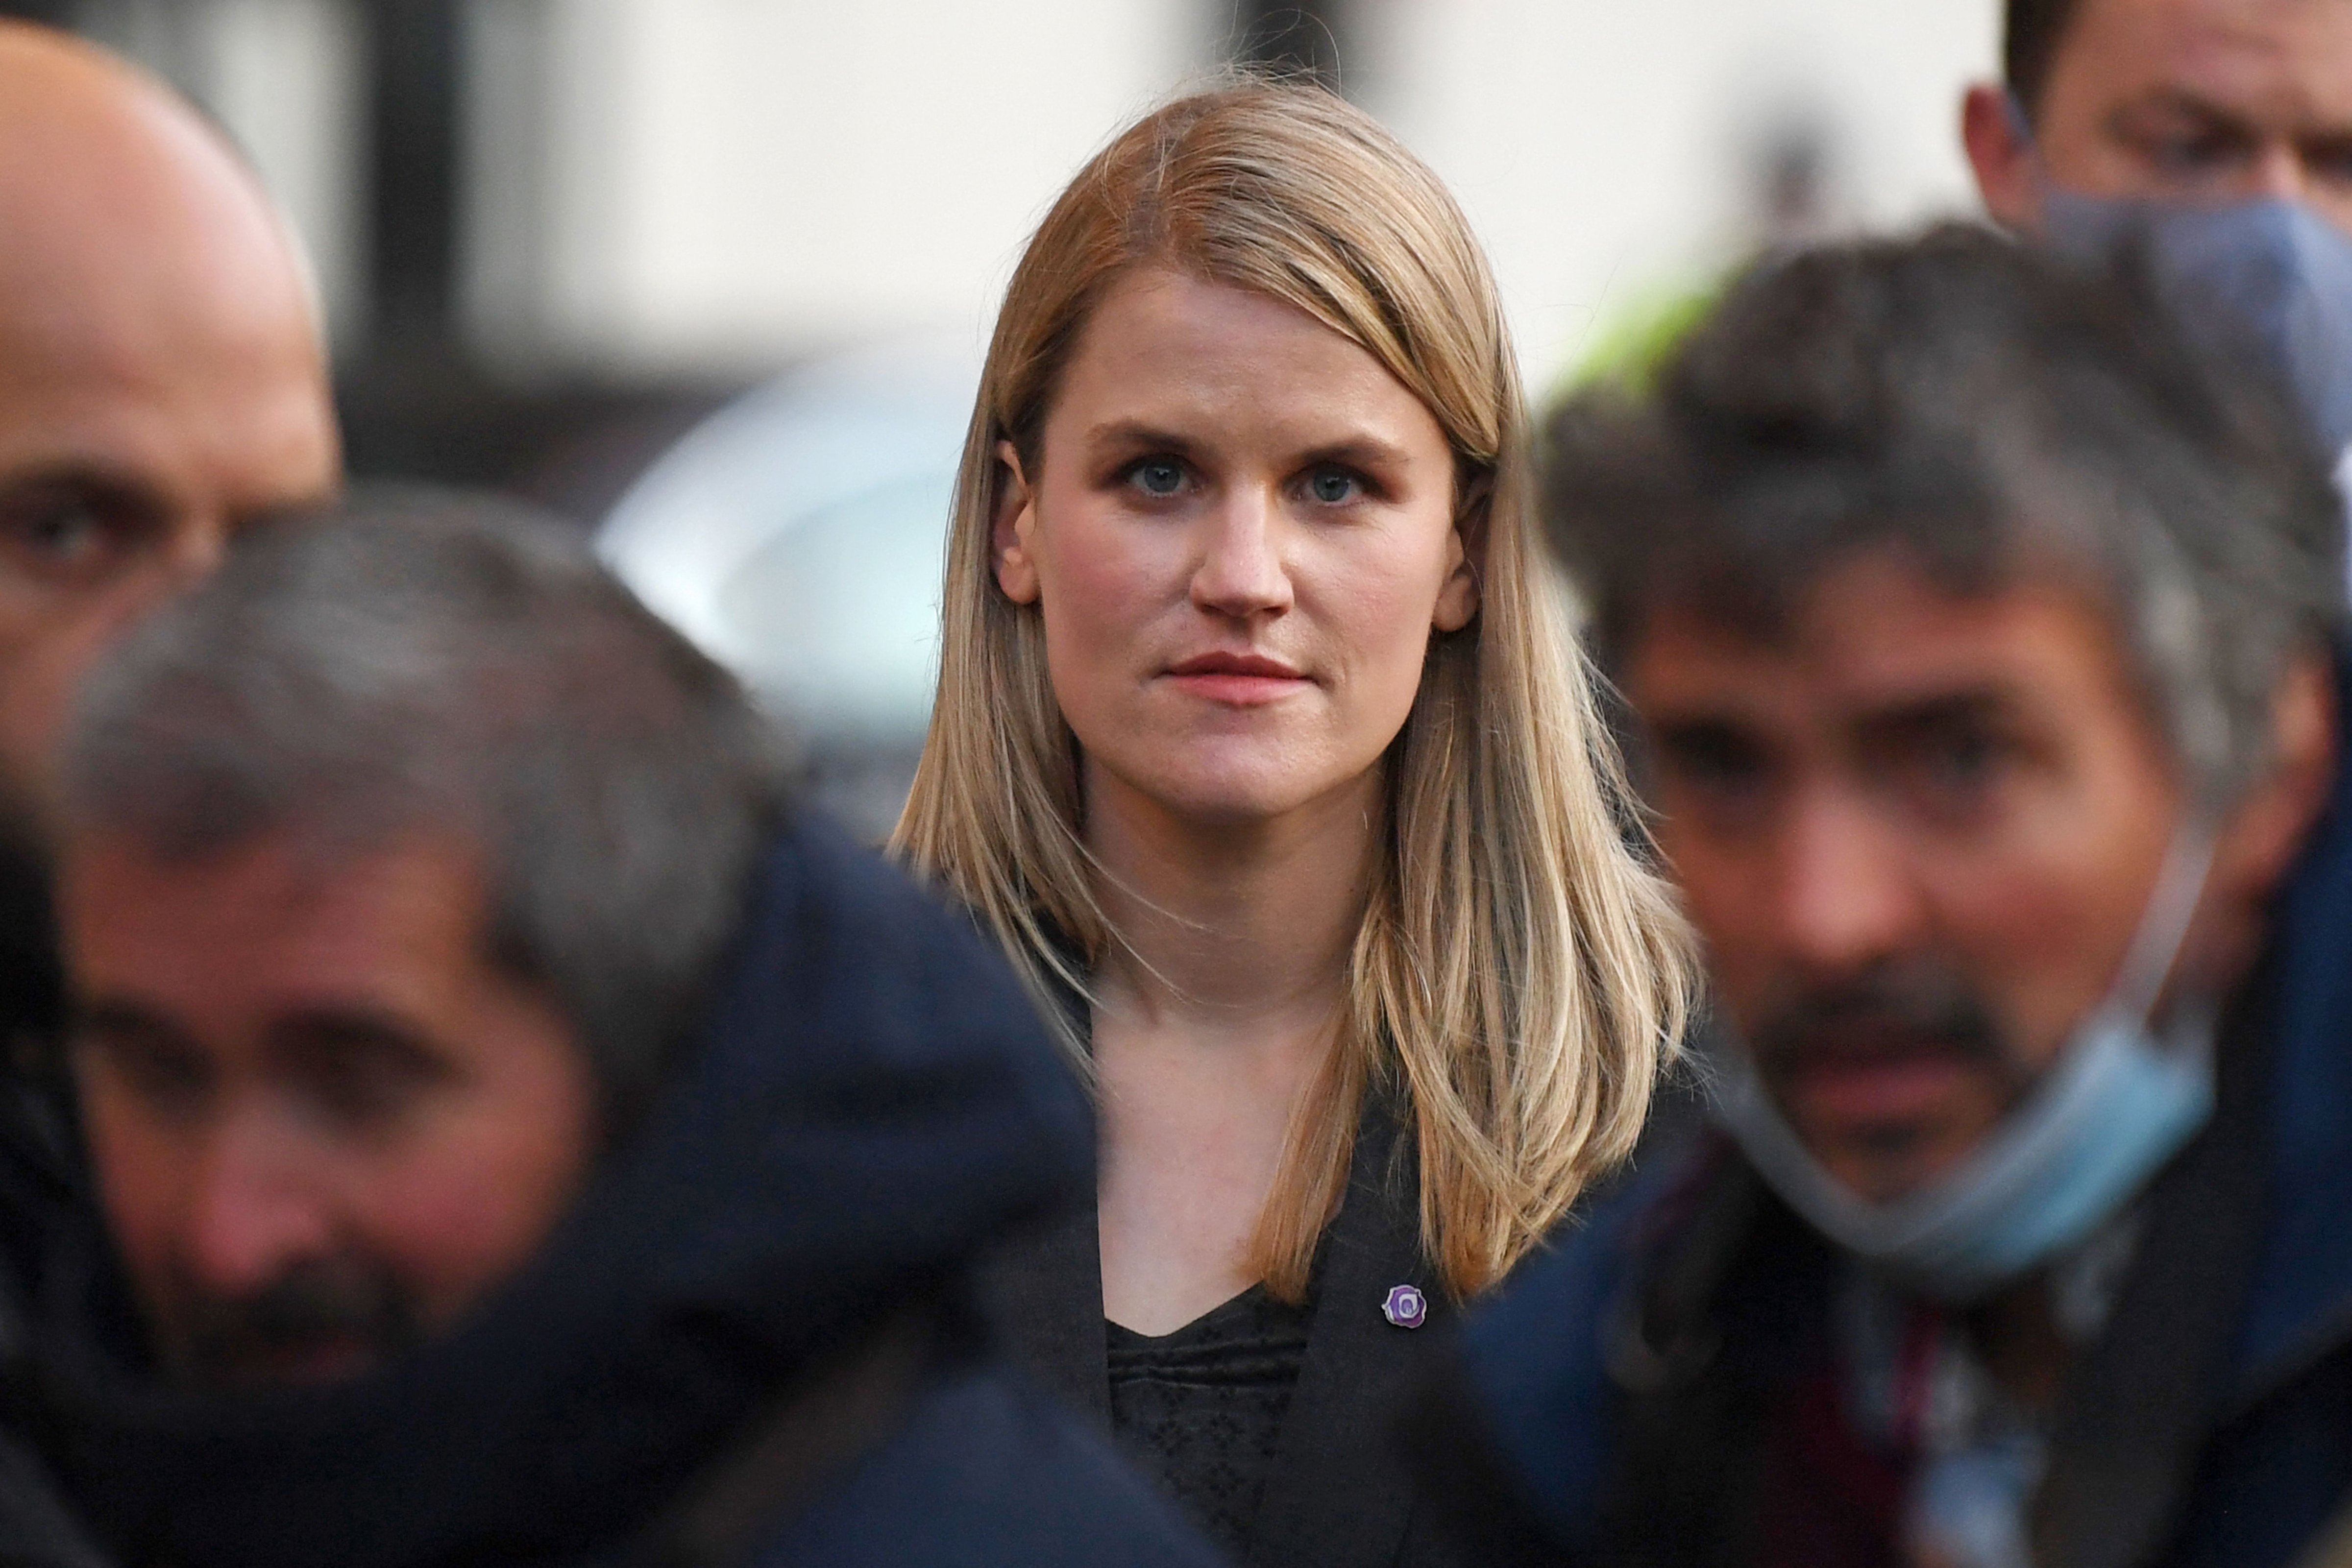 Facebook whistleblower Frances Haugen in London on Oct. 25, 2021. The former Facebook employee leaked a trove of internal documents alleging Facebook knew its products were fueling hate and harming children's mental health. (Daniel Leal-Olivas—AFP/Getty Images)